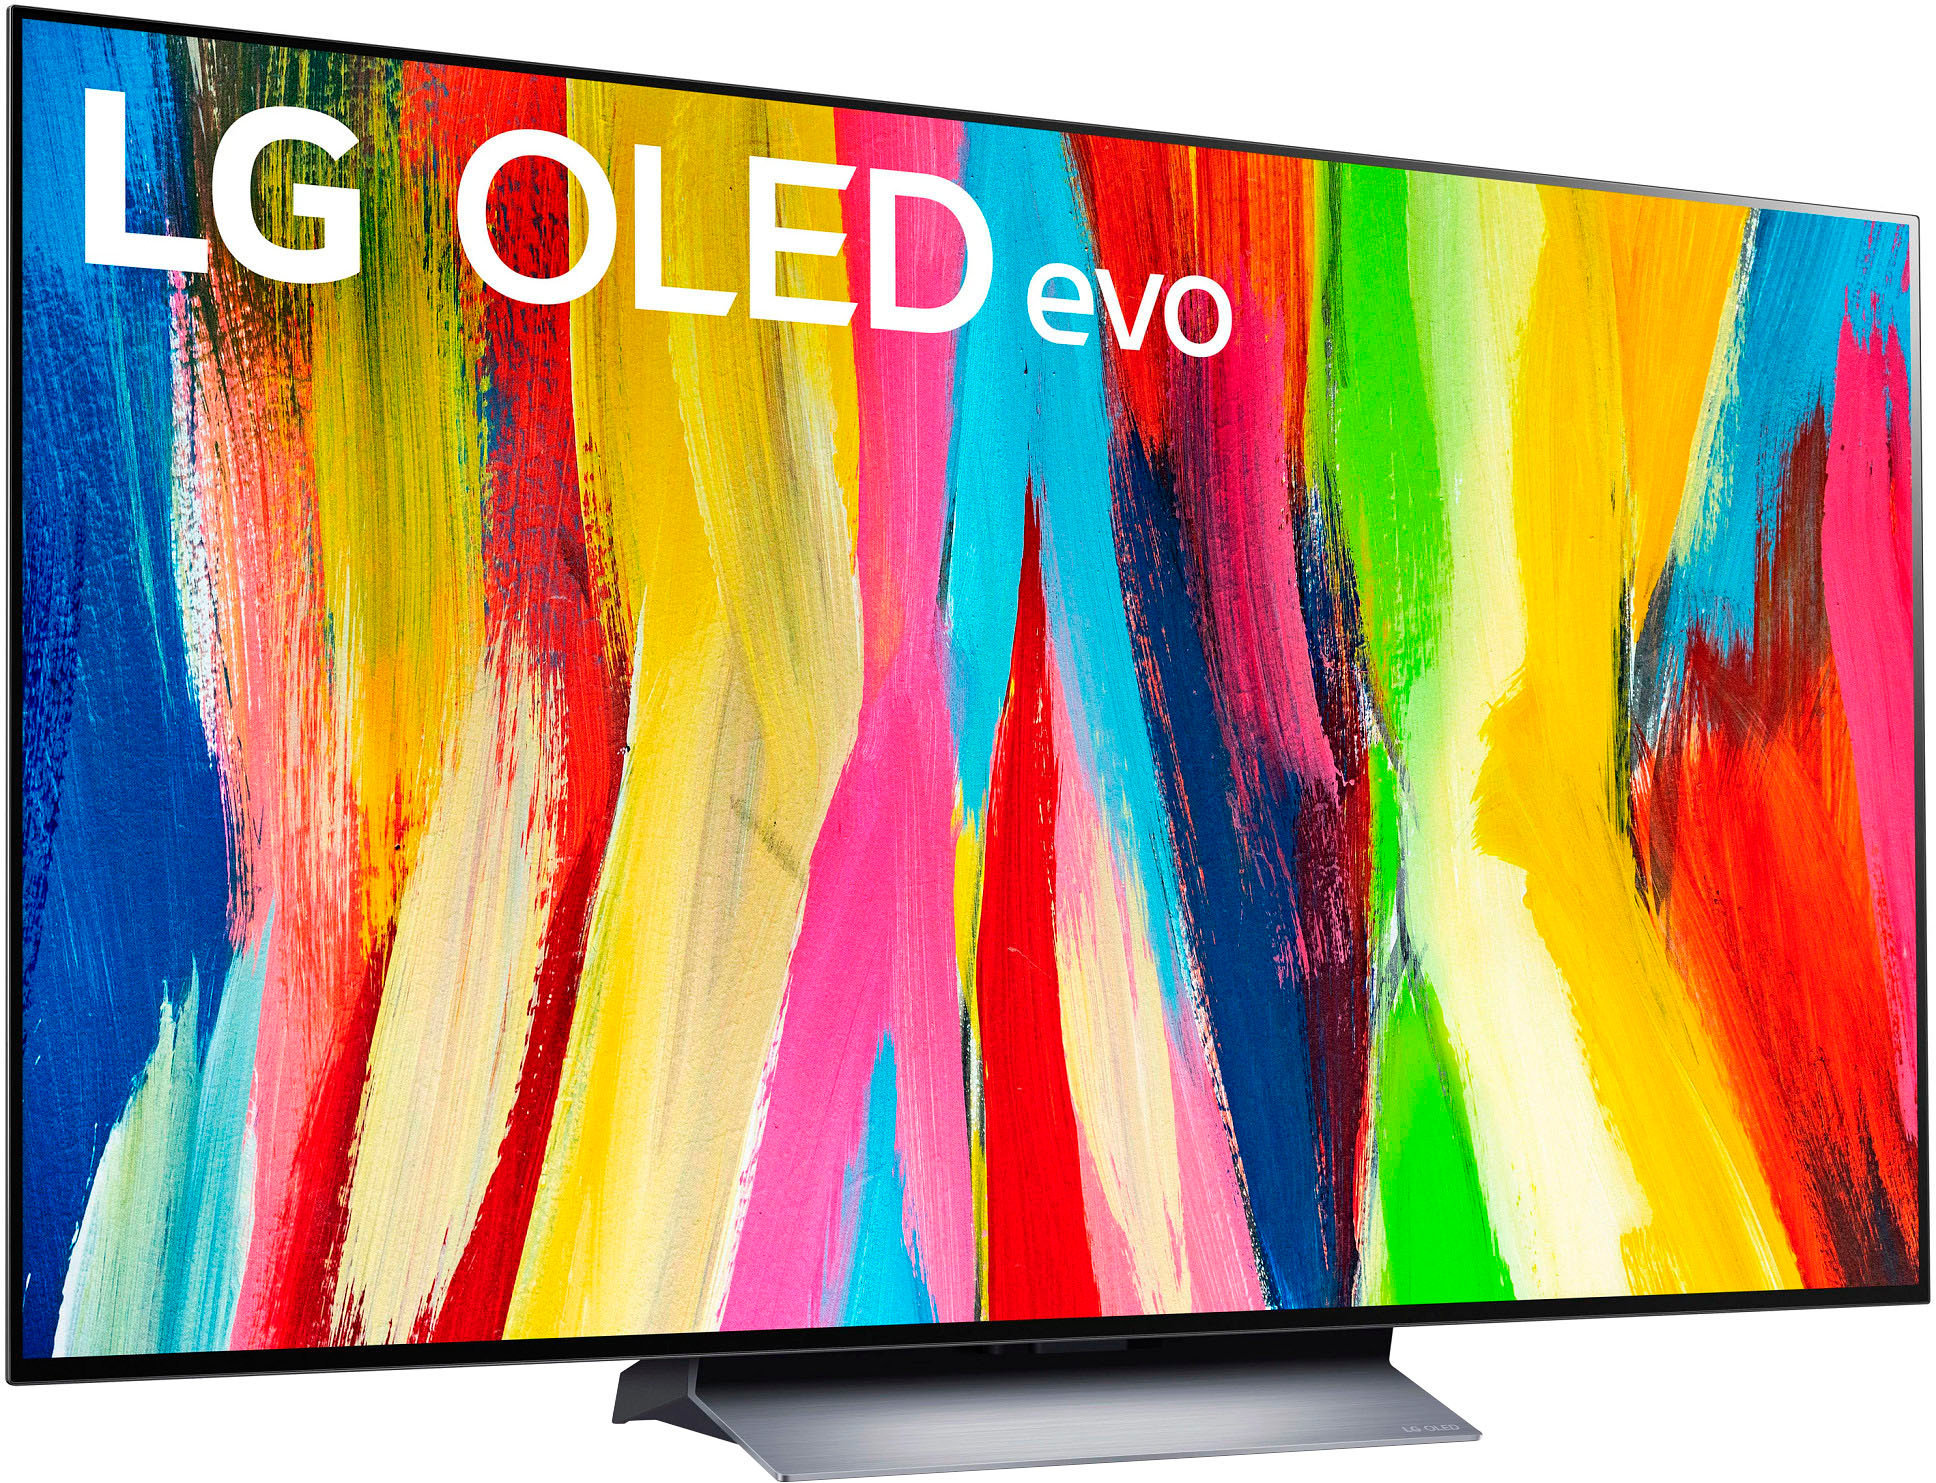 LG C3 OLED evo: UNBOXING AND FULL REVIEW - Brighter Panel and HDMI